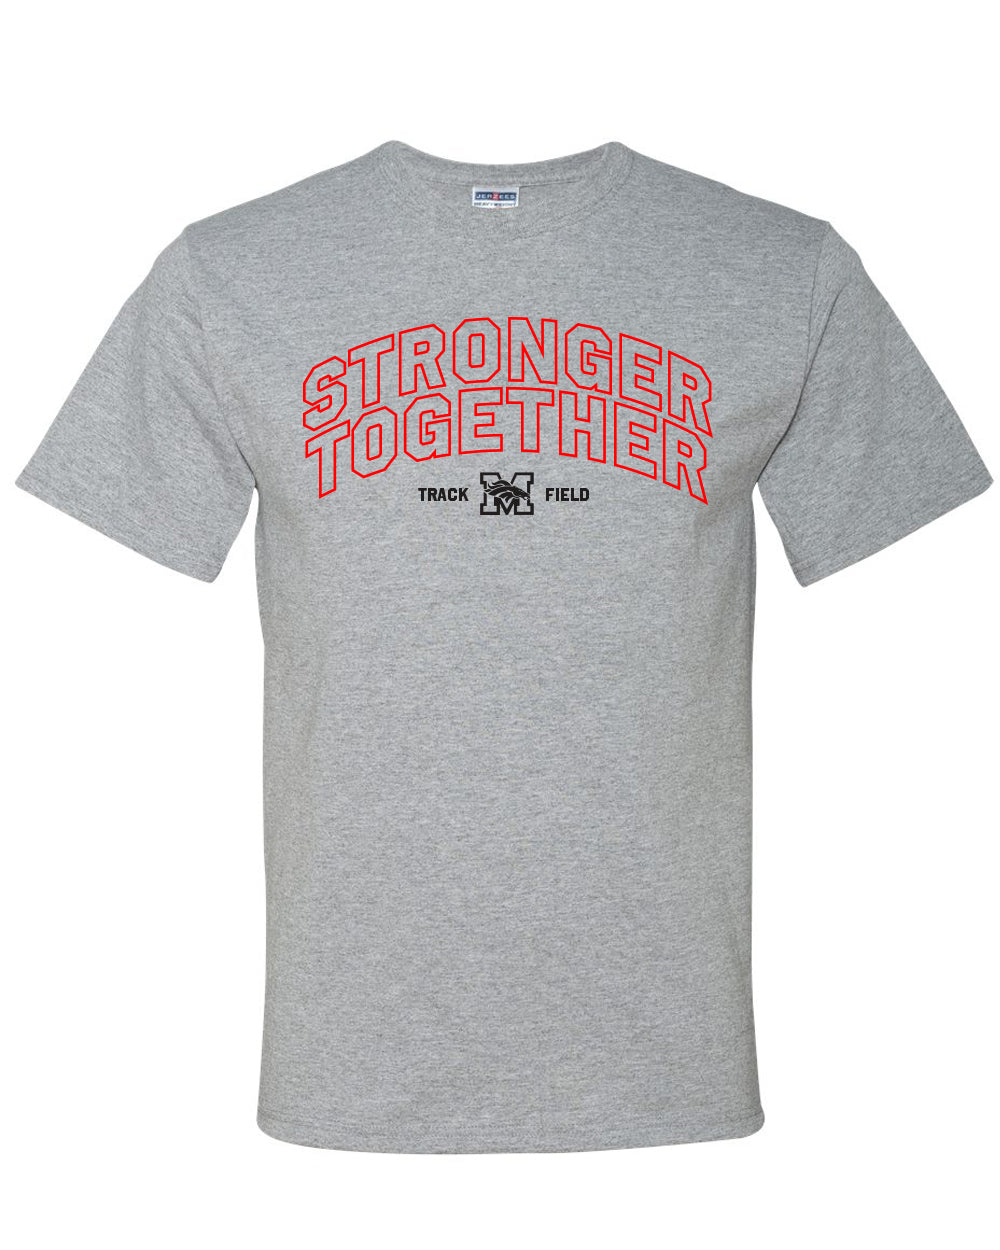 Stronger Together T-Shirt - Mustang Track